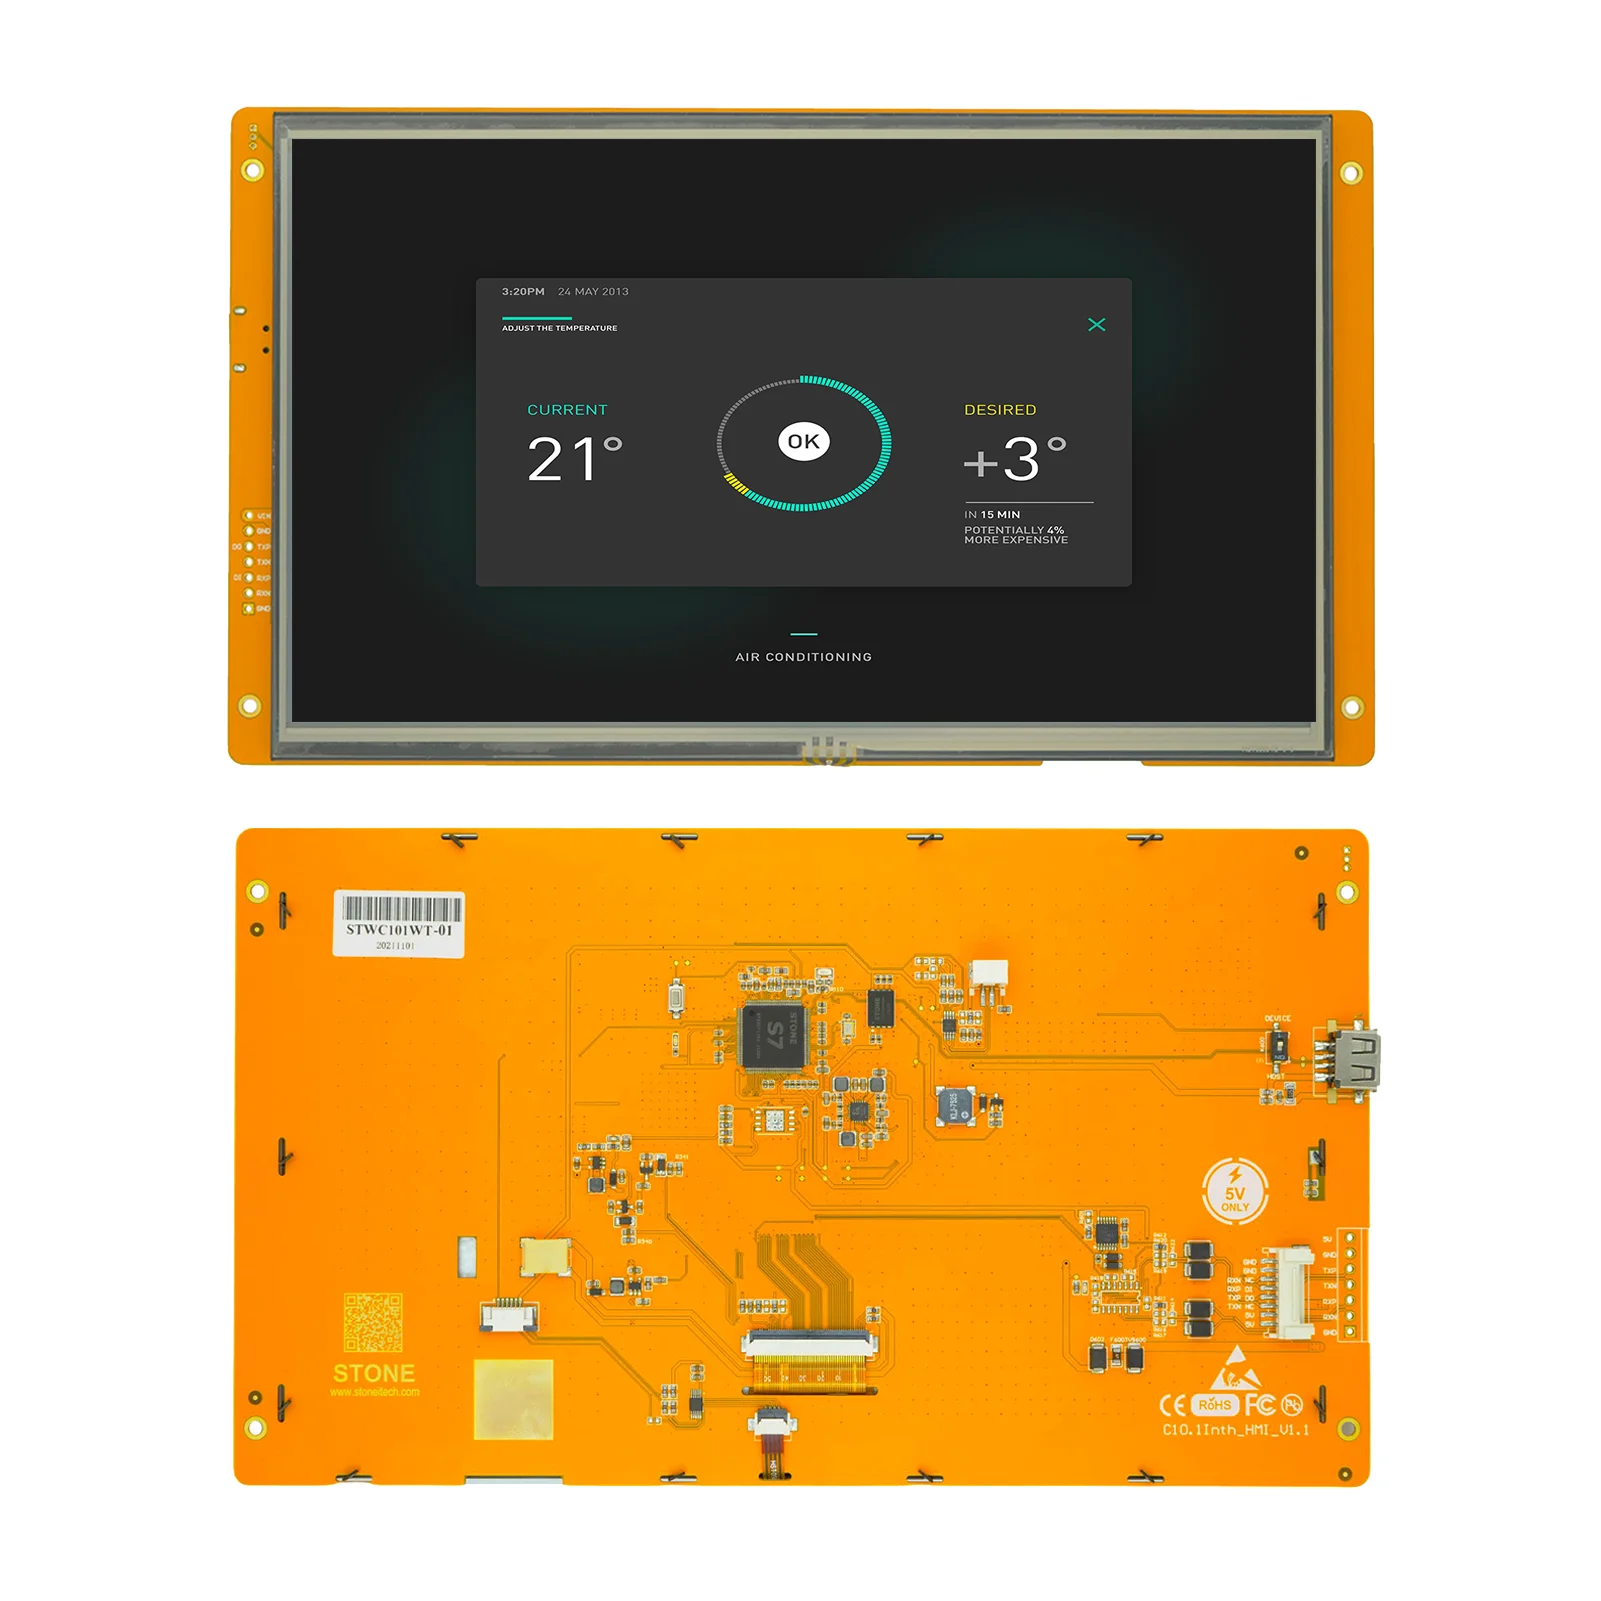 SCBRHMI 10.1 Inch HMI Smart TFT LCD Display with Controller + Program + Touch Screen + UART Serial Interface